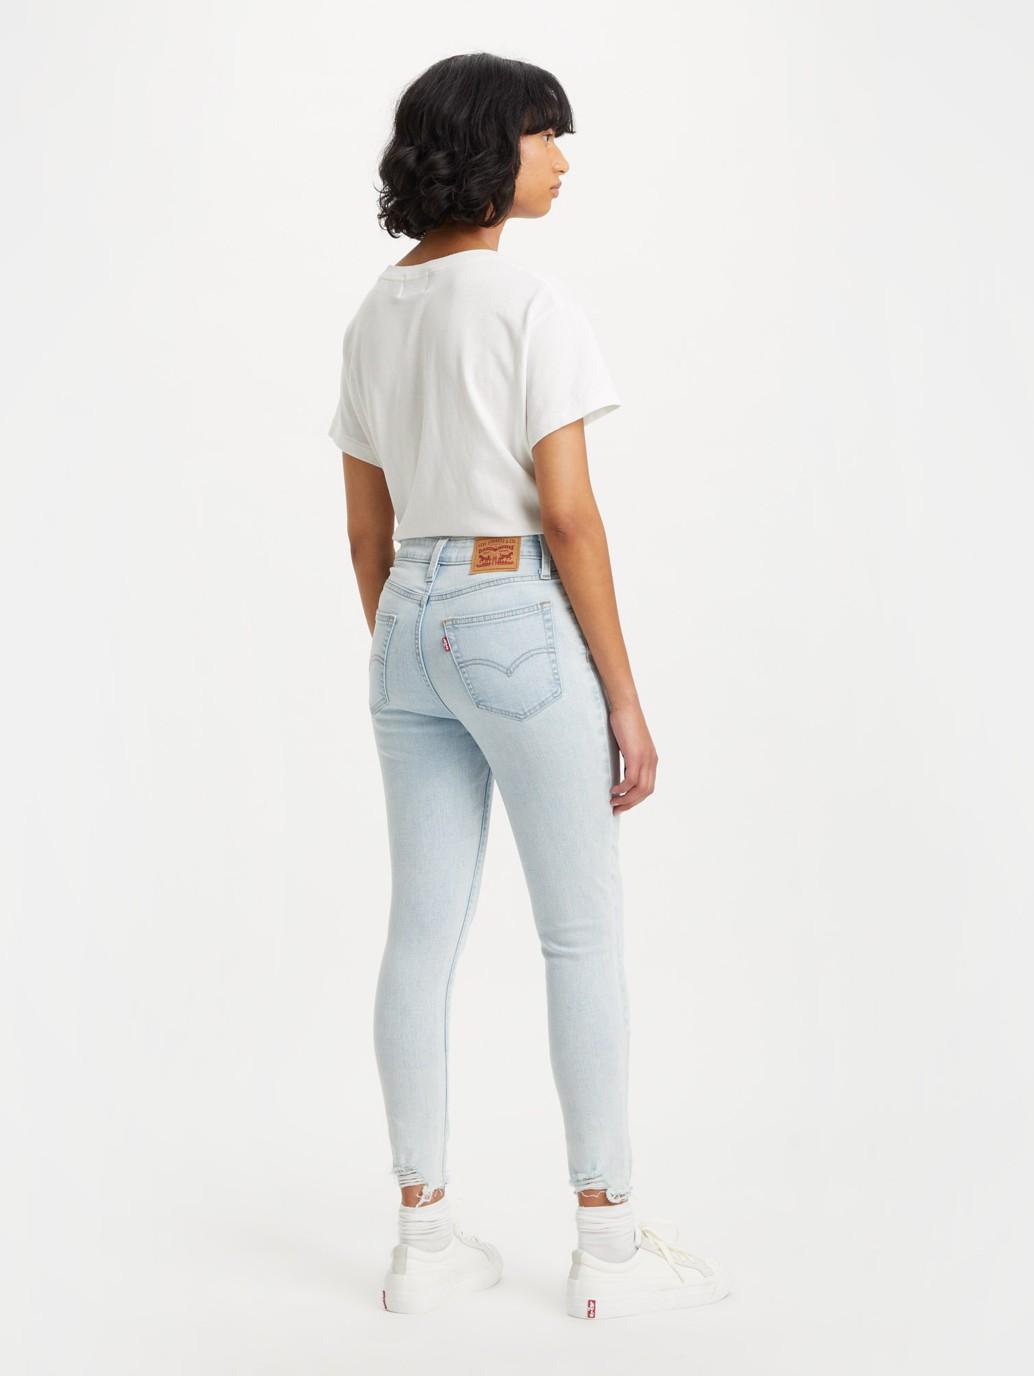 Buy Levi's® Women's 721 High-Waisted Skinny Jeans | Levi’s® Official ...